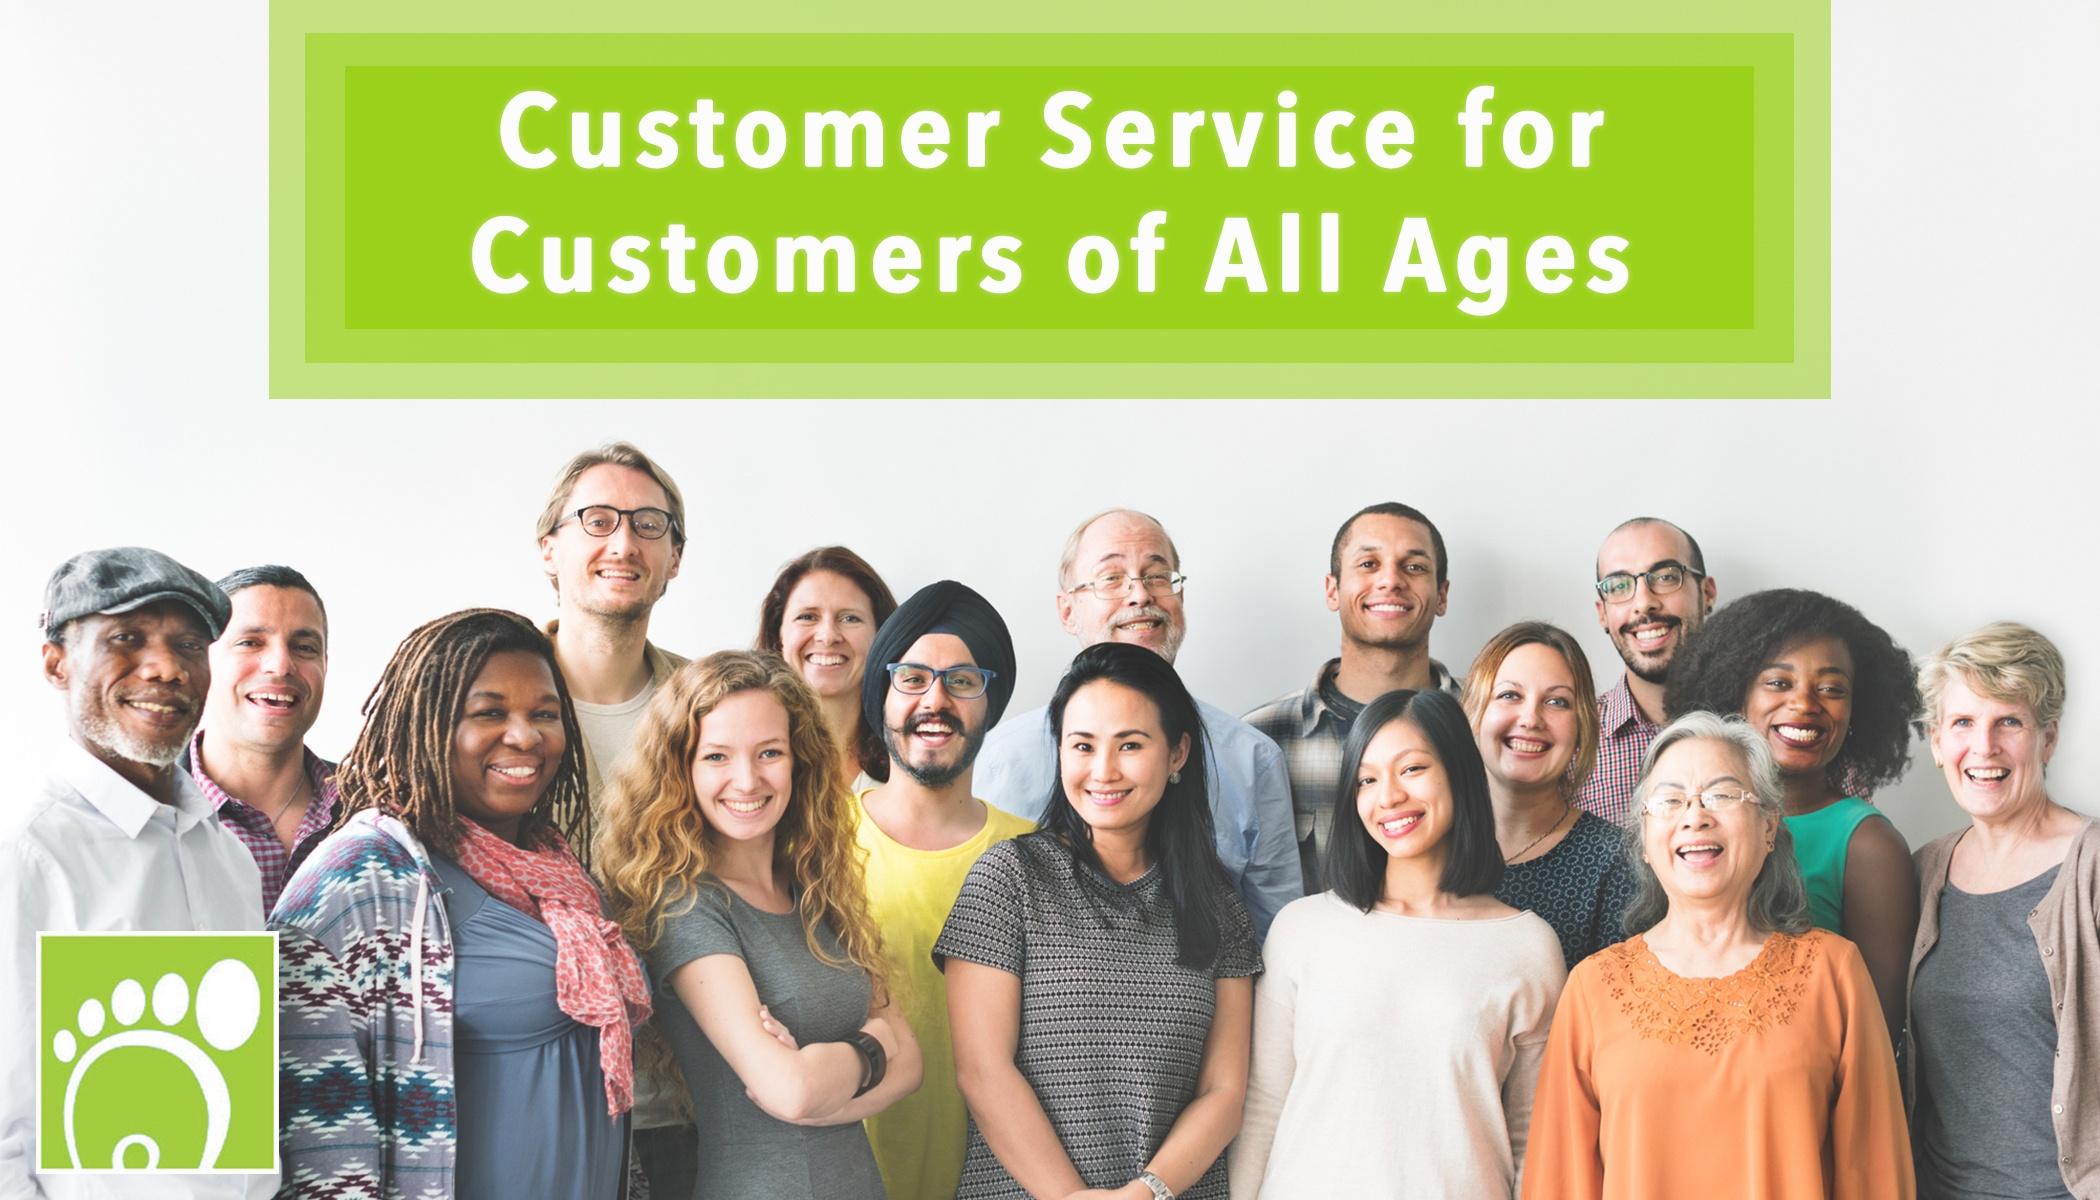 Customer Service for Customers of all Ages